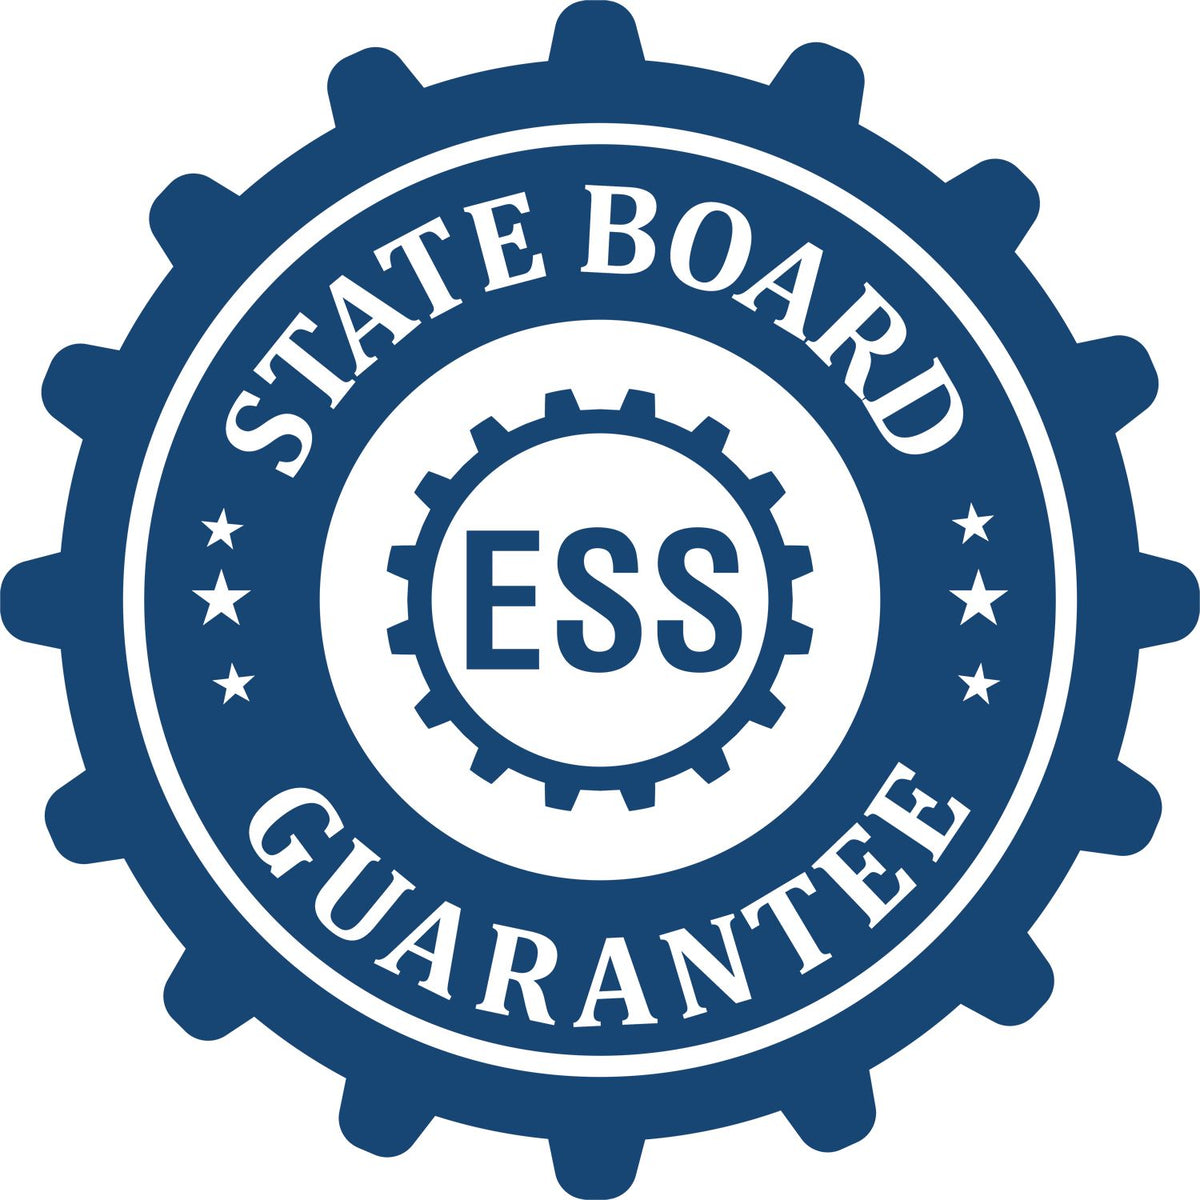 An emblem in a gear shape illustrating a state board guarantee for the Digital New Mexico Landscape Architect Stamp product.